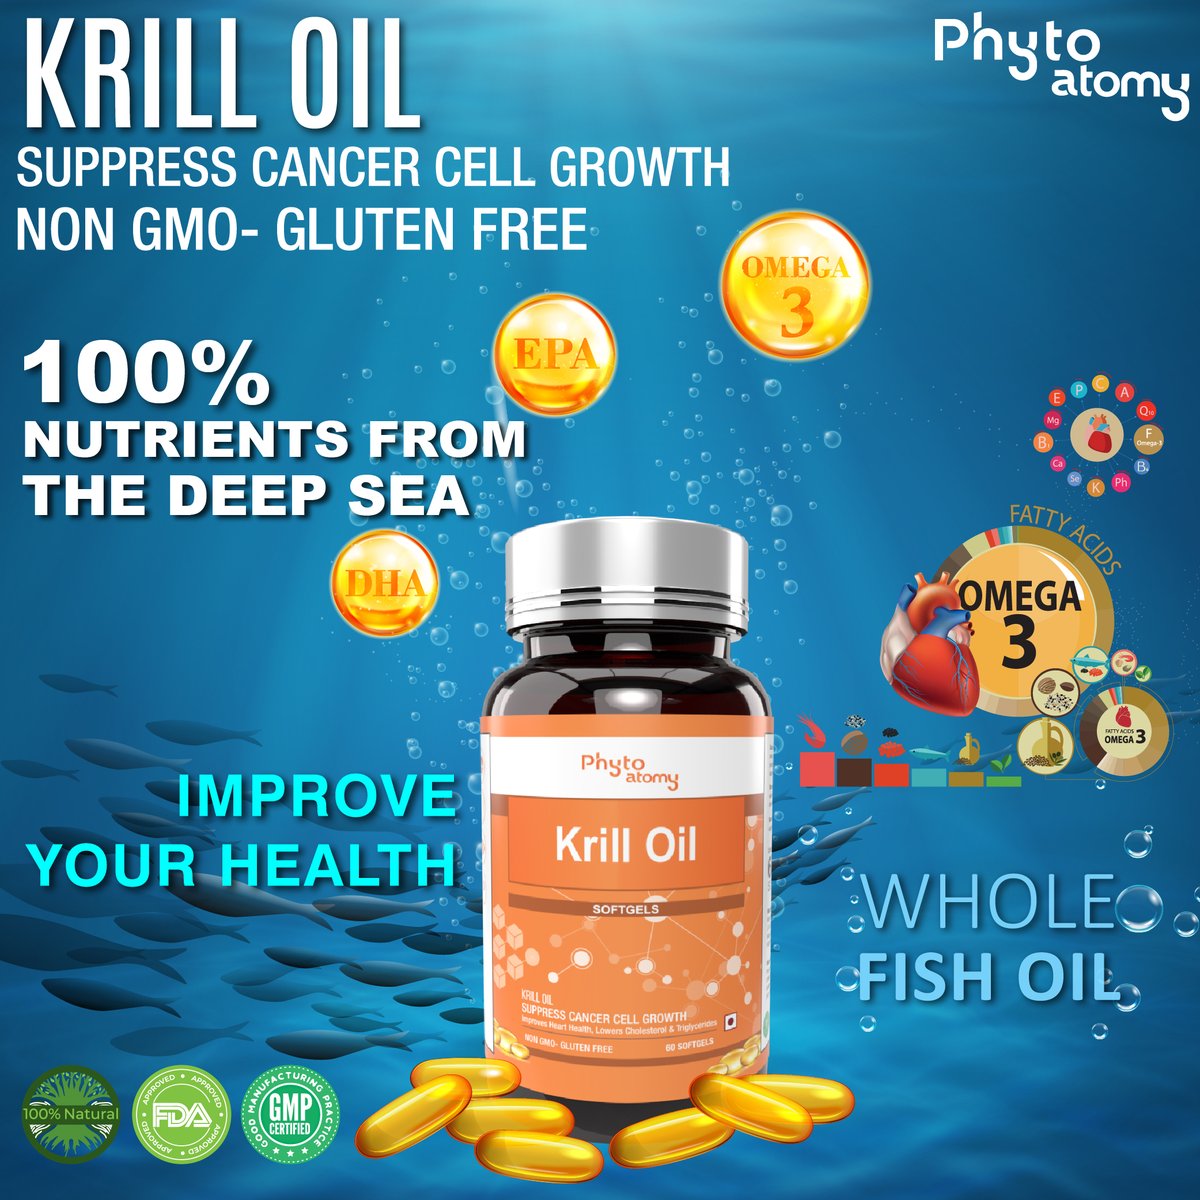 Krill Oil By Phyto Atomy

For More Details Message On WhatsApp No. 6356023545

Click On This Link To Register Yourself and Join Our Business 👇🏻

reseller.phytoatomy.com/phytomart/regi…

#phyto #phytoatomy #krilloil